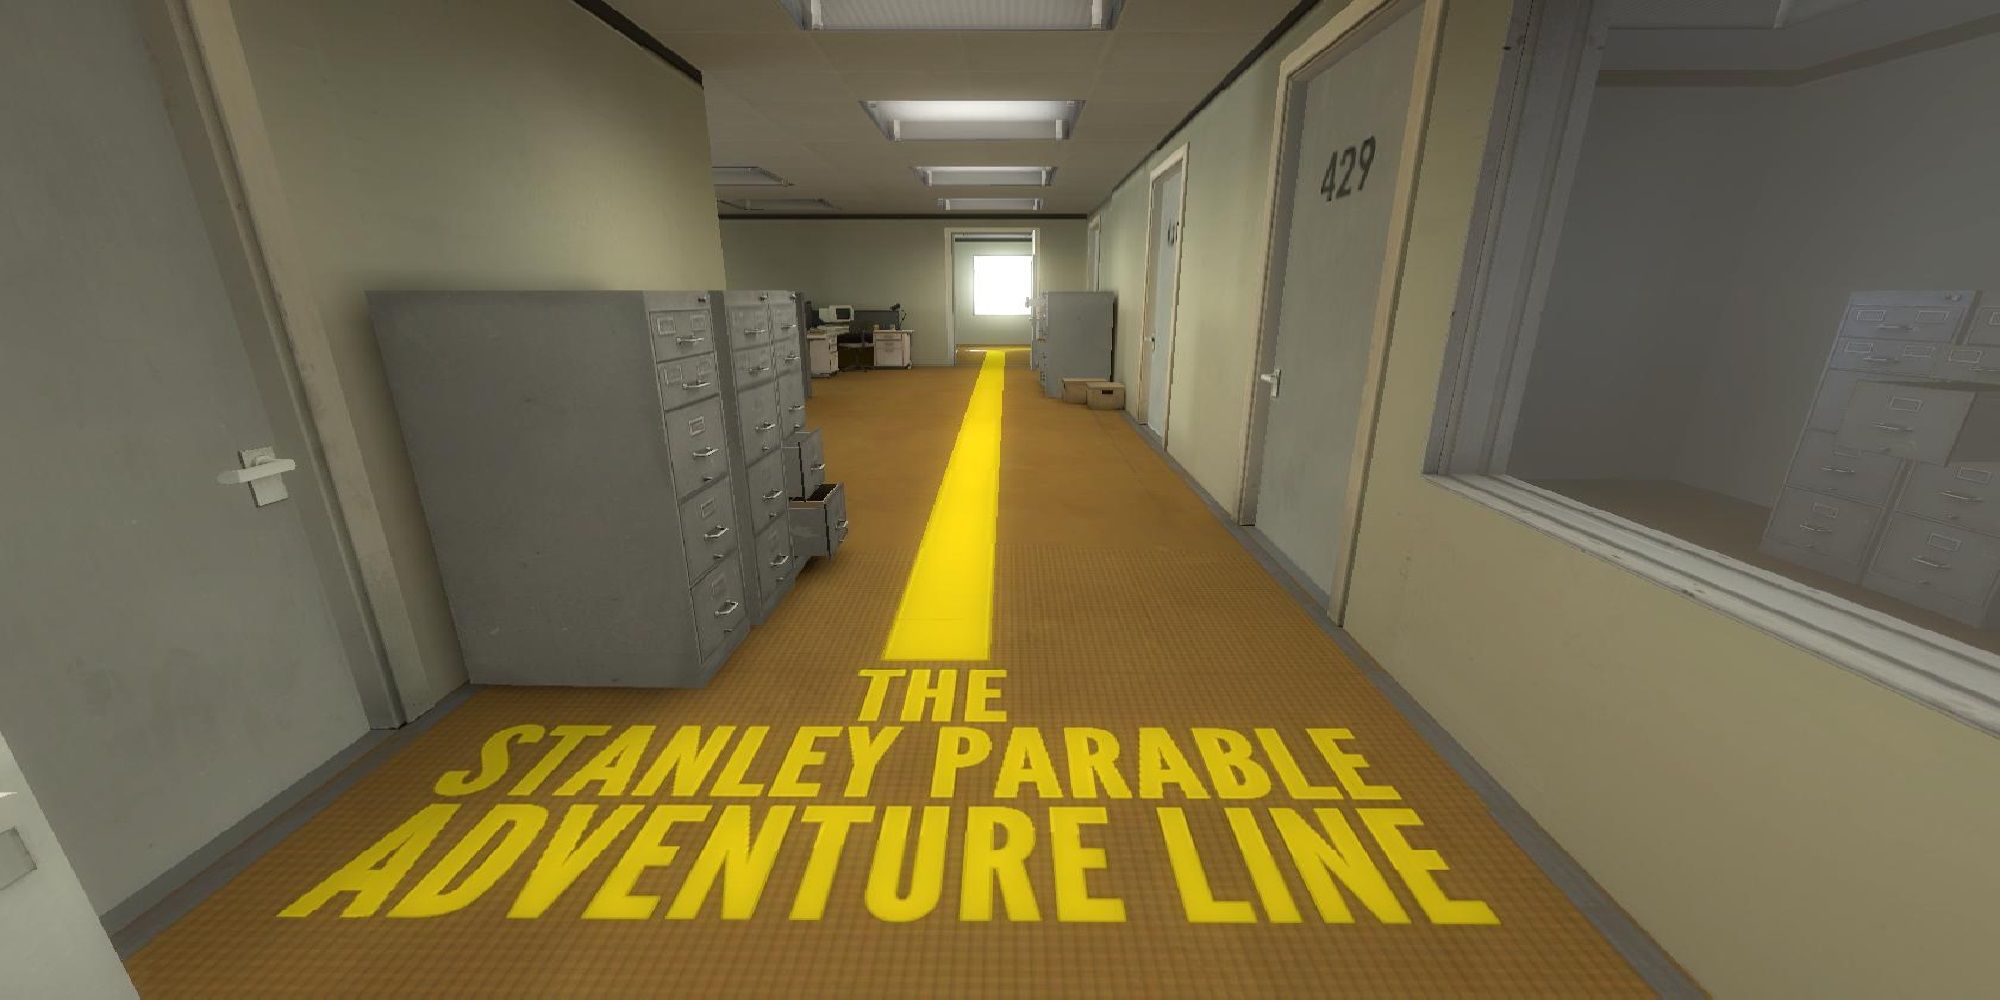 The Stanley Parable Adventure Line In The Not Stanley Ending